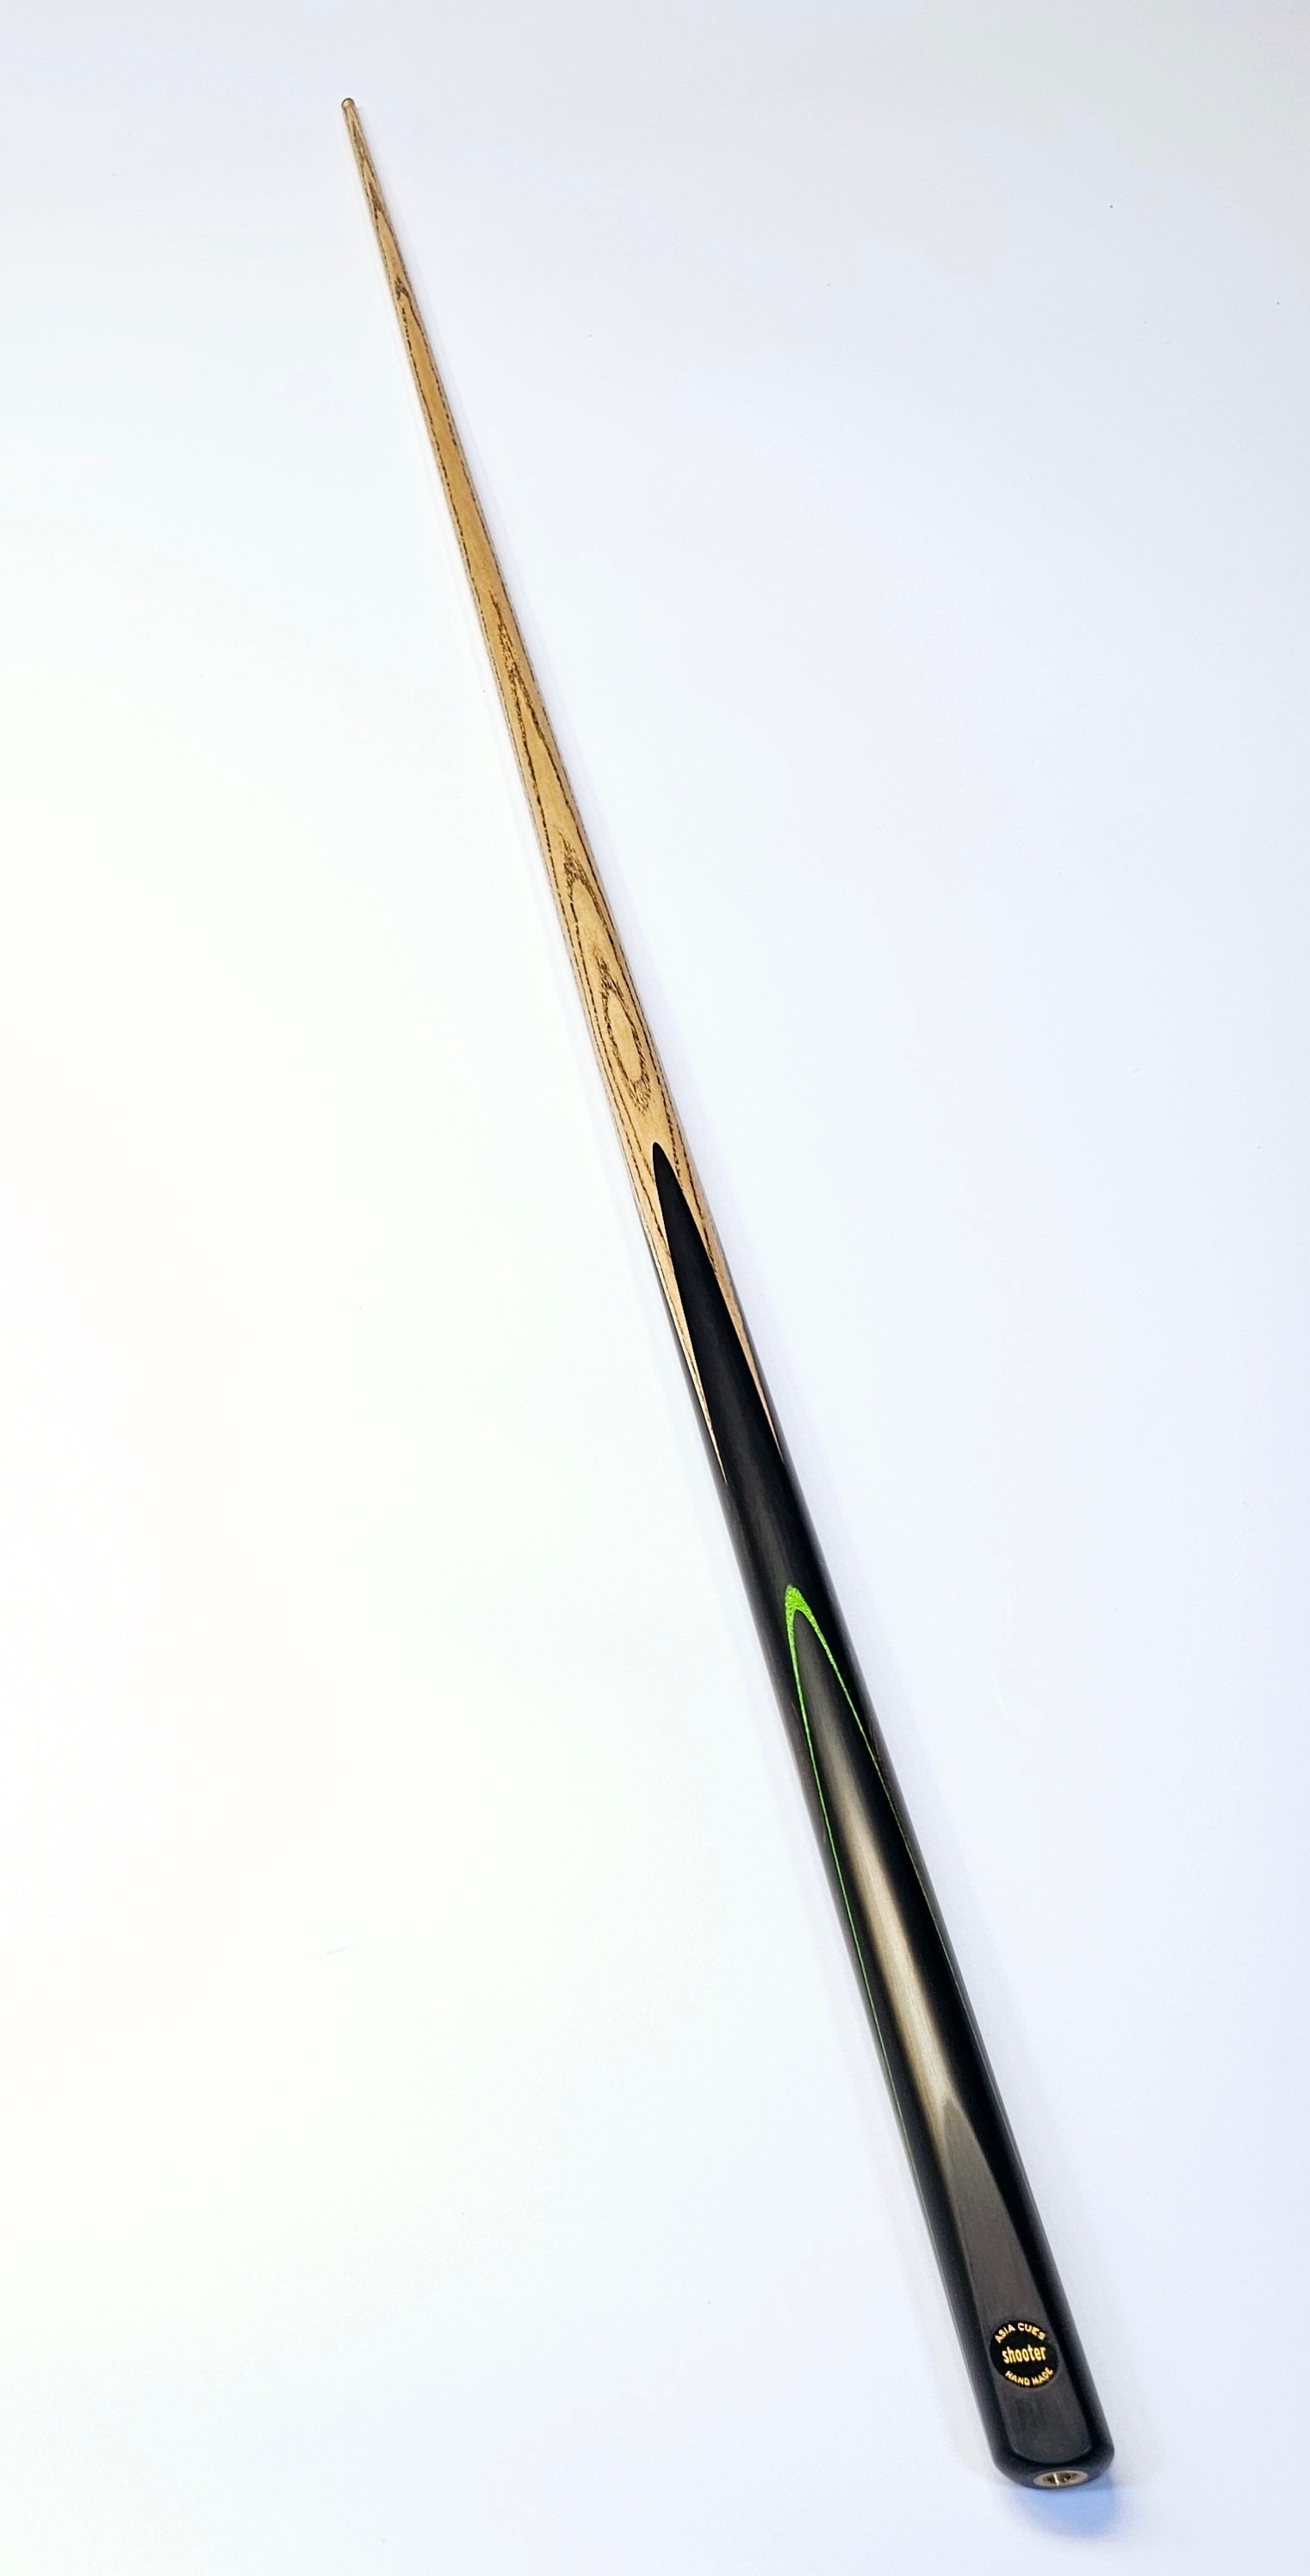 Asia Cues Shooter - One Piece Snooker Cue 9.6mm Tip, 17.7oz 58"